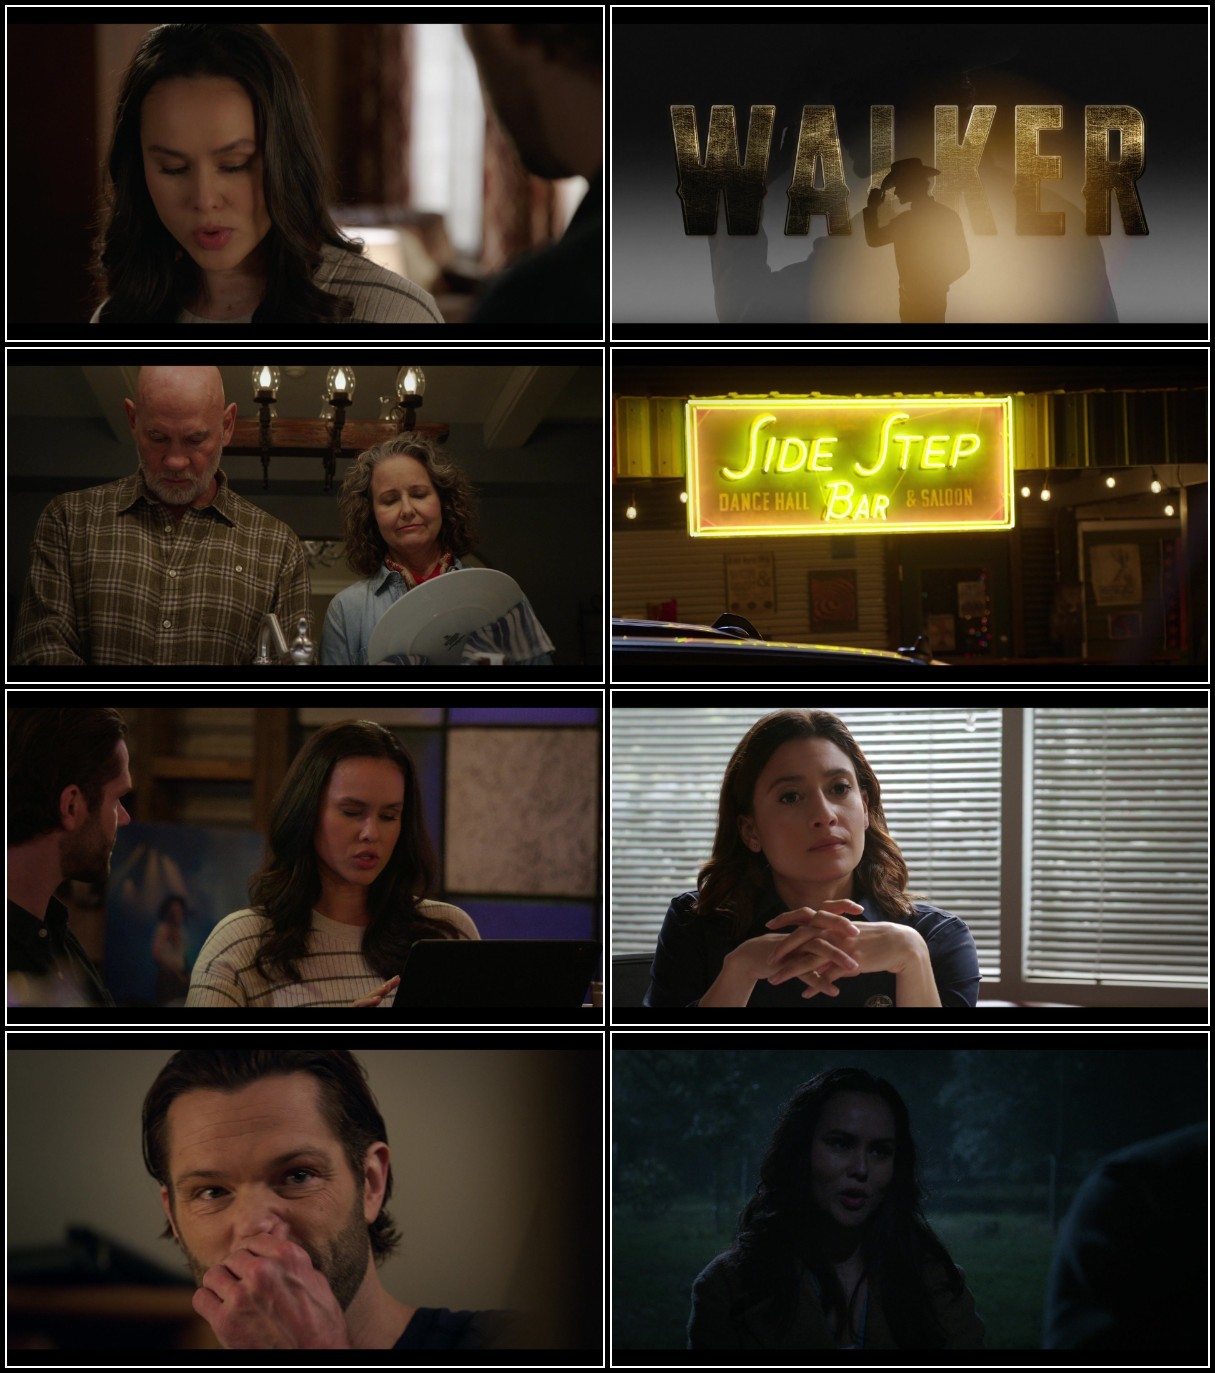 Walker S03E10 Blinded By The Light 1080p AMZN WEBRip DDP5 1 x264-NTb